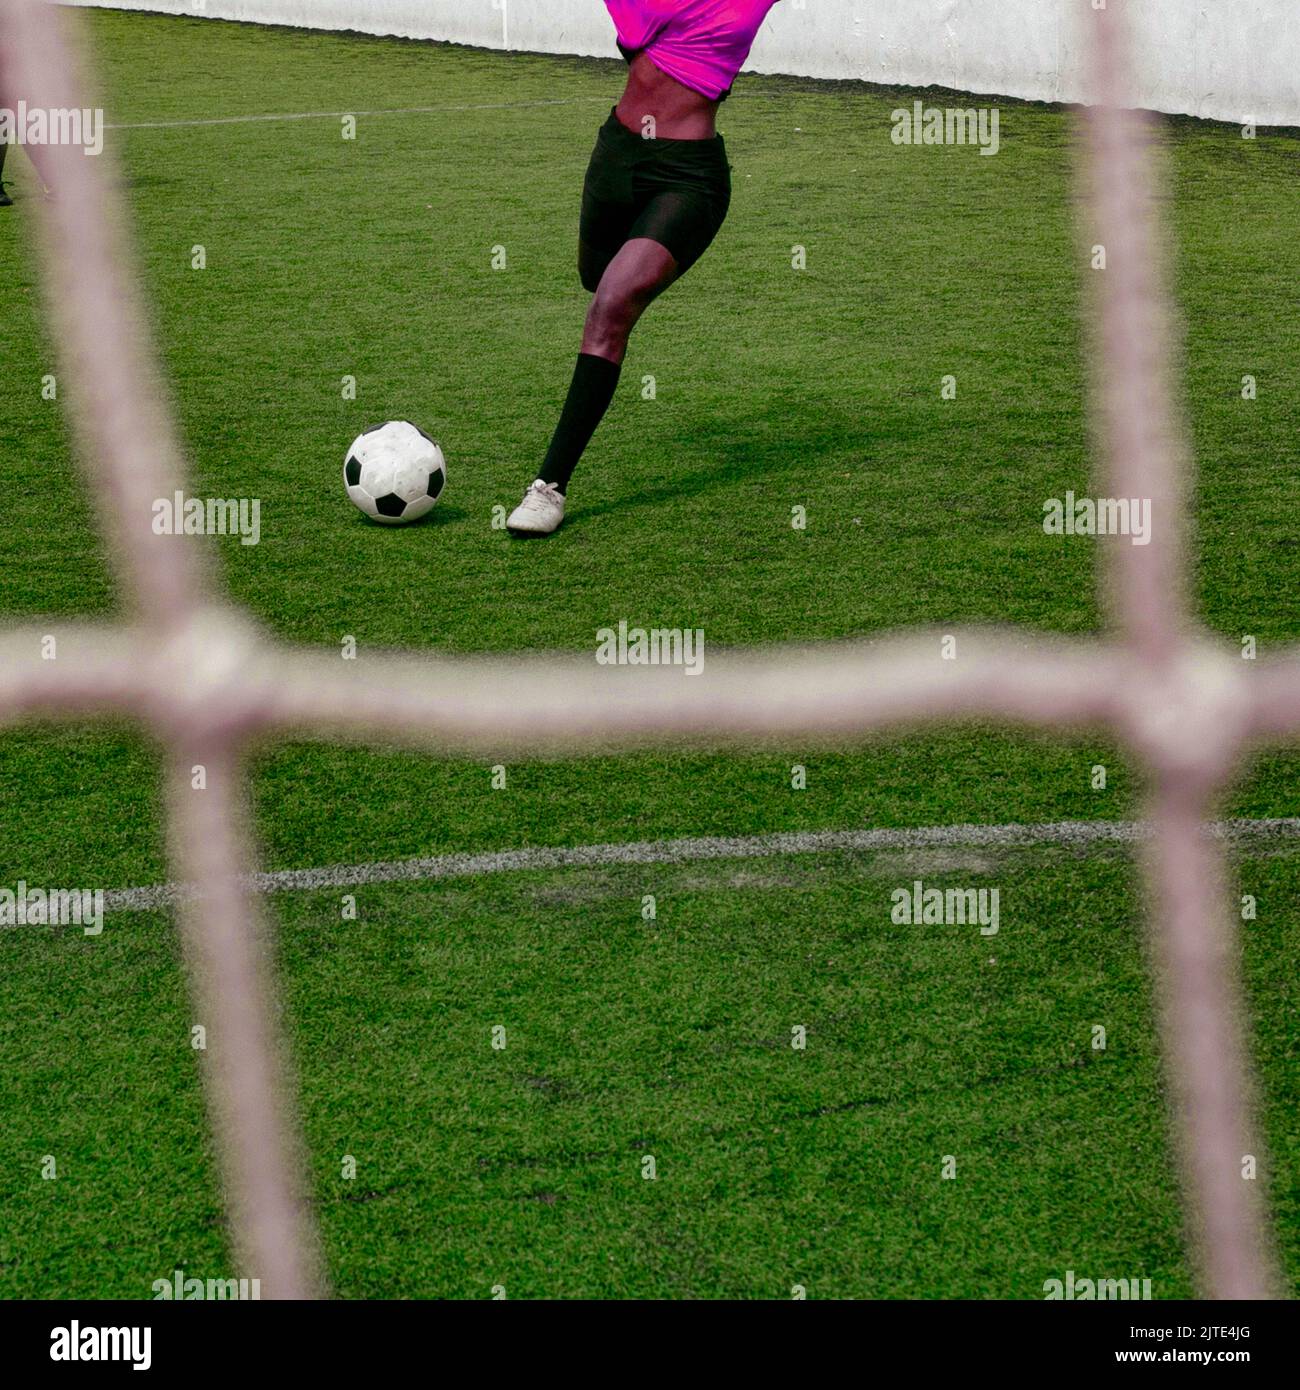 Unrecognizable dark skinned colored woman in a wrapped up pink purple soccer sports uniform kicking a soccer ball at goal on the football field. Stock Photo